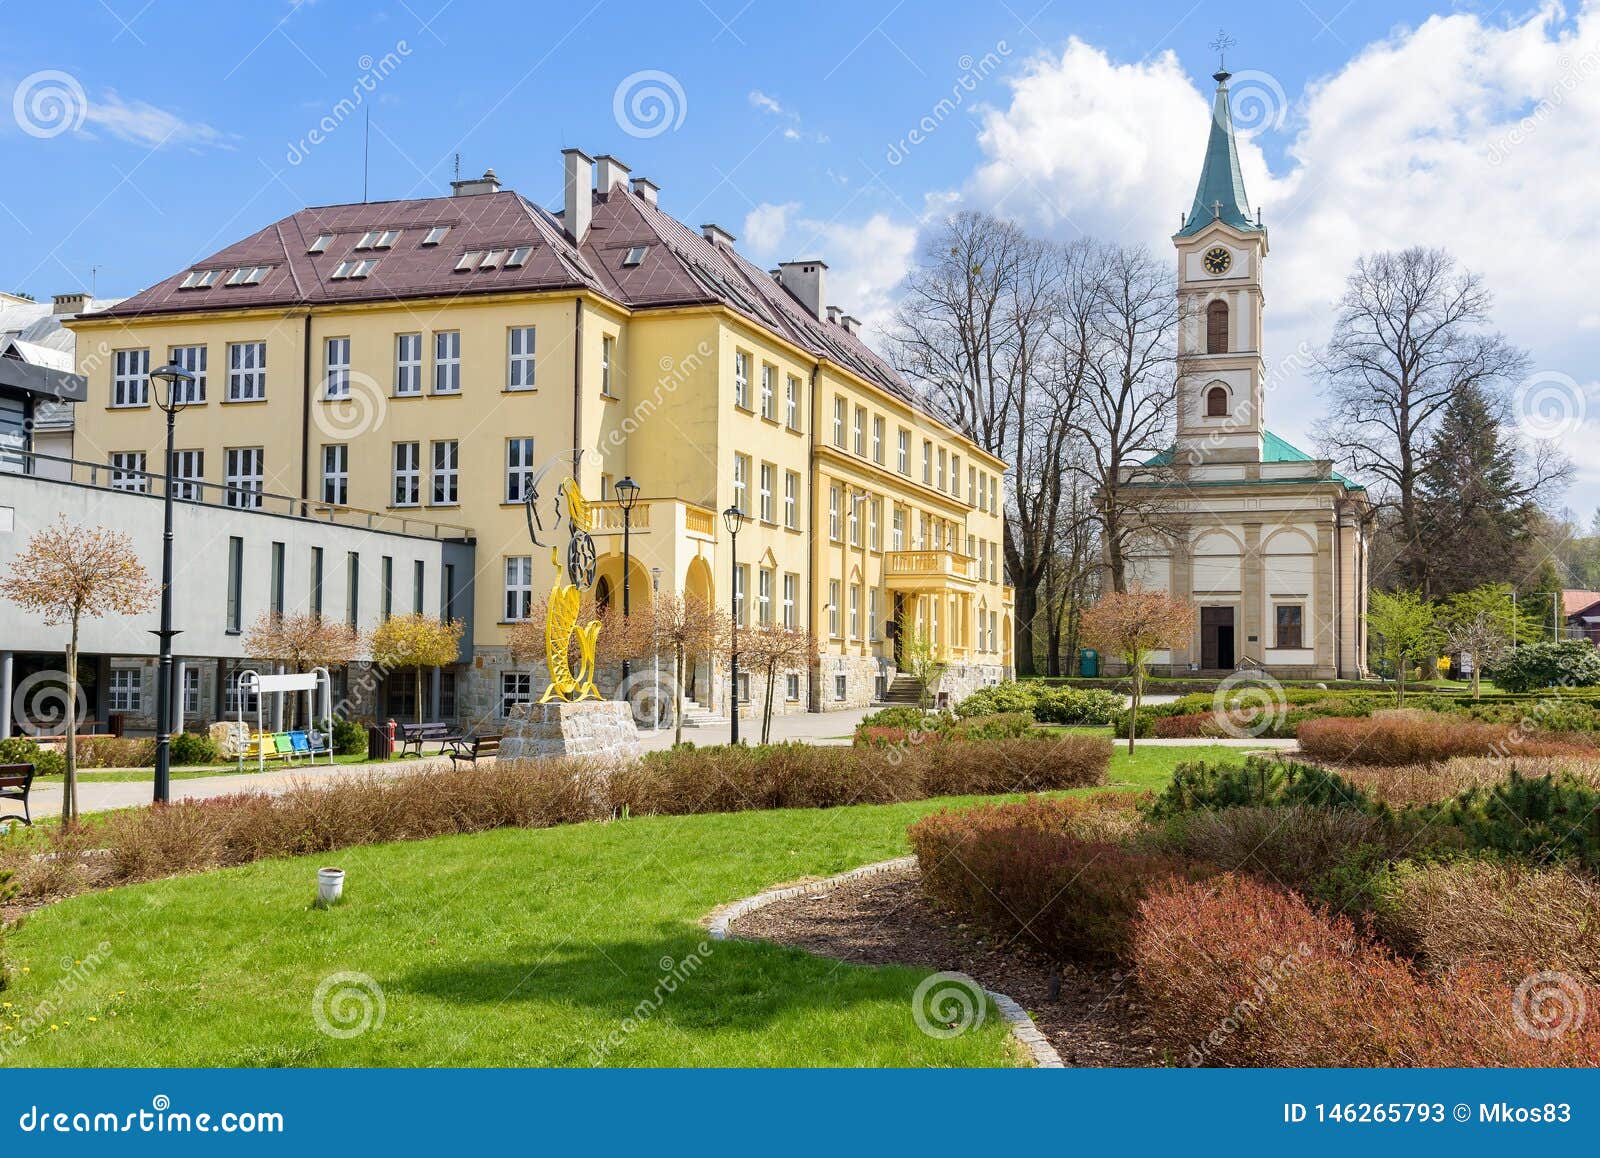 view of hoff square in wisla in poland